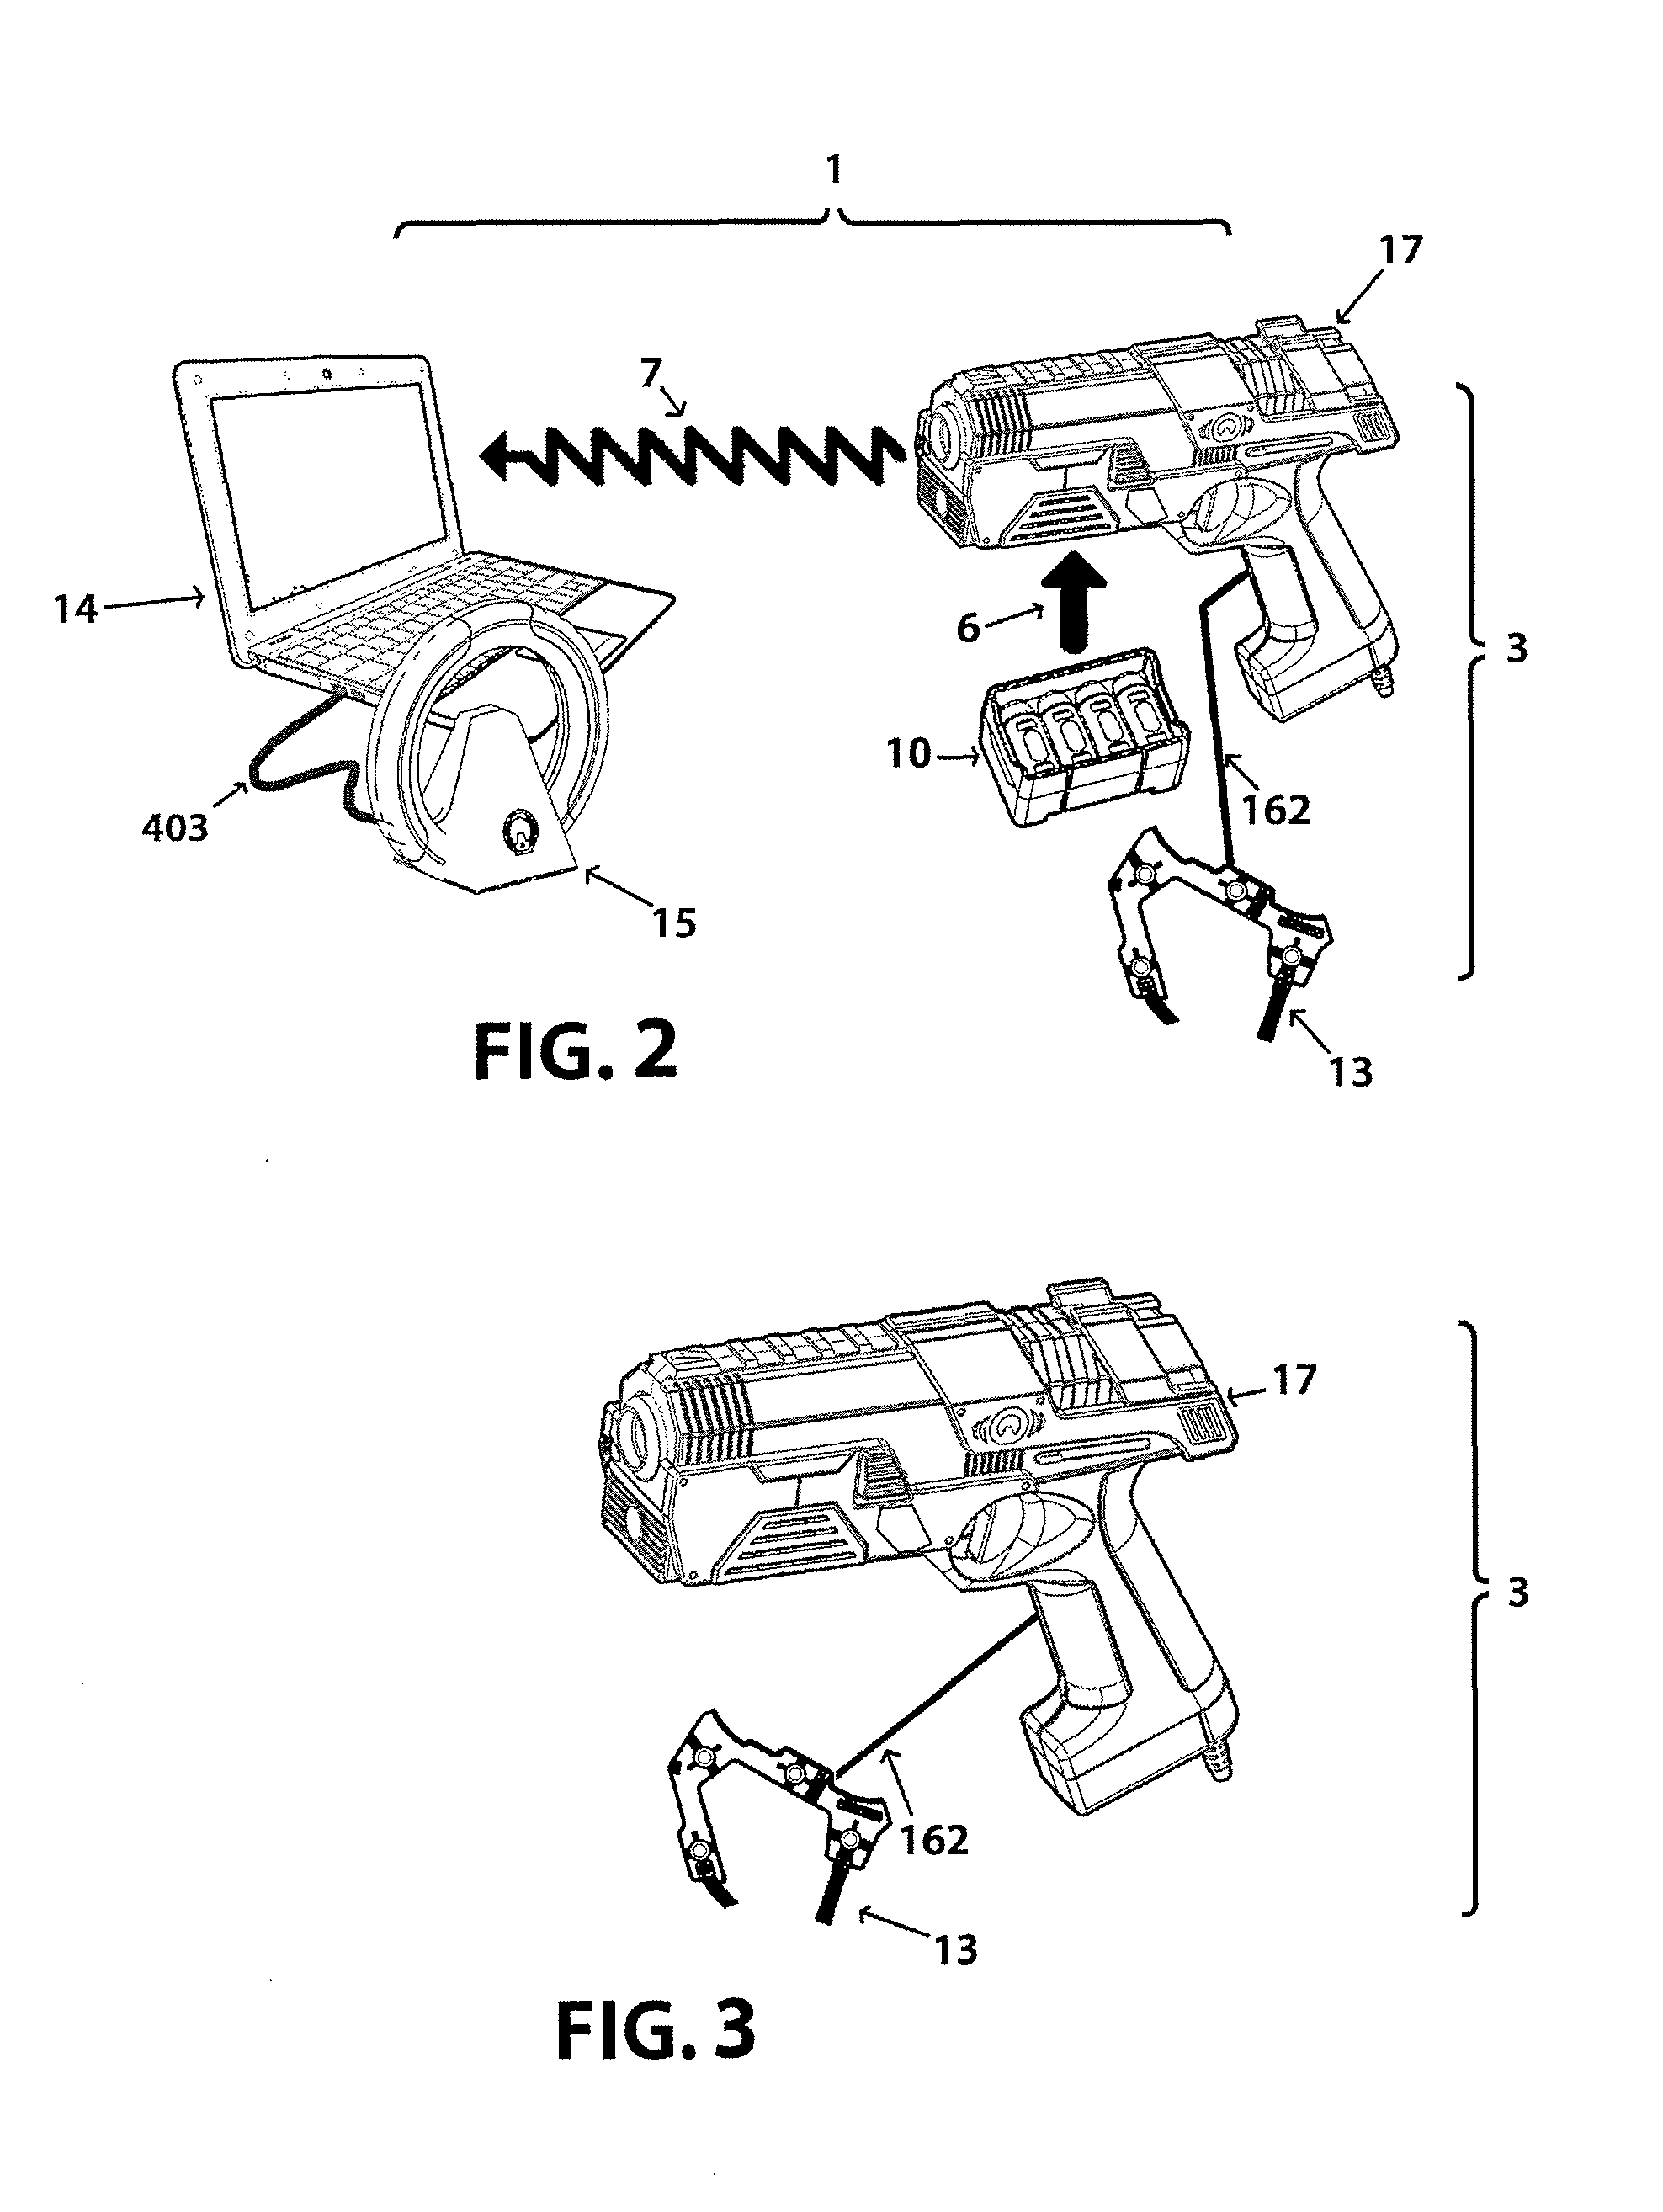 Interactive game systems and methods including a transceiver and transponder receptor